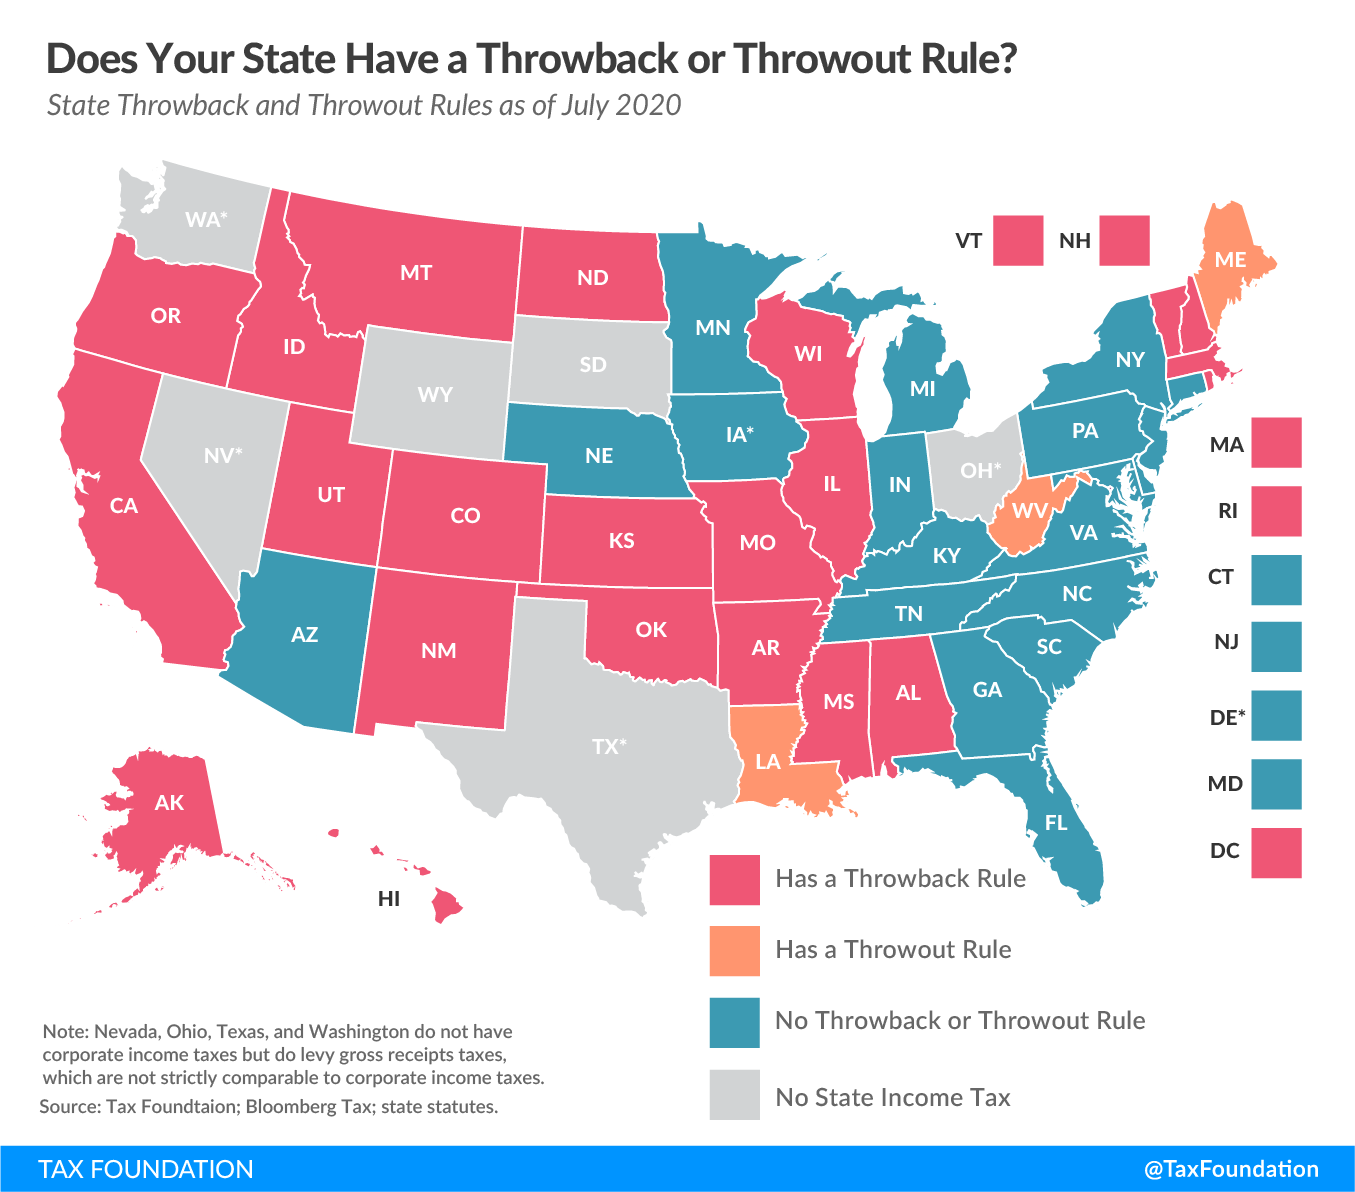 State throwback rules, state throwout rules